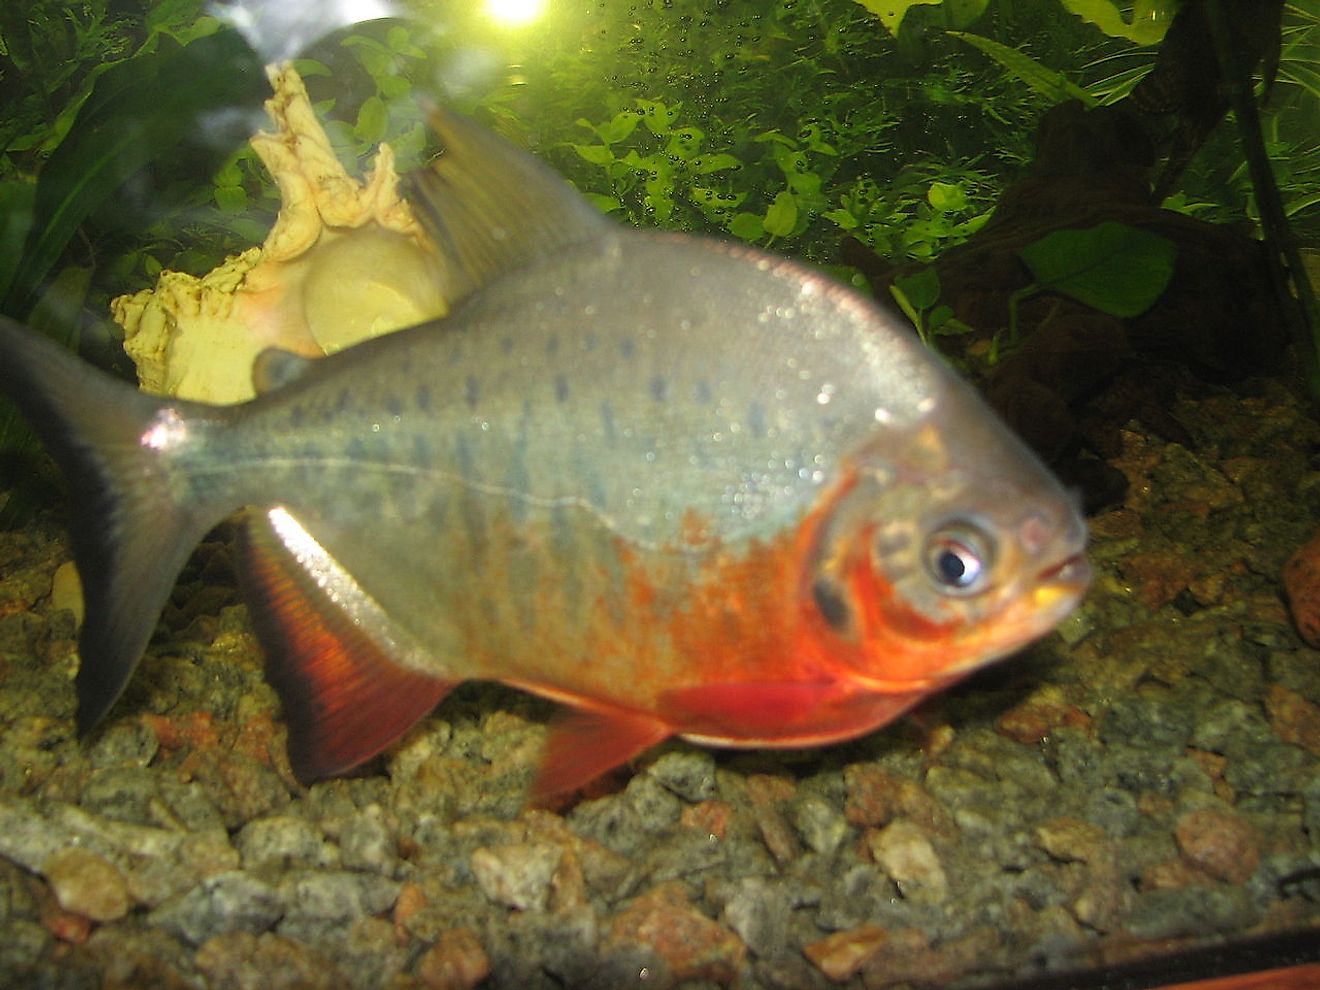 The red pacu. Image credit: Wisky/Wikimedia.org